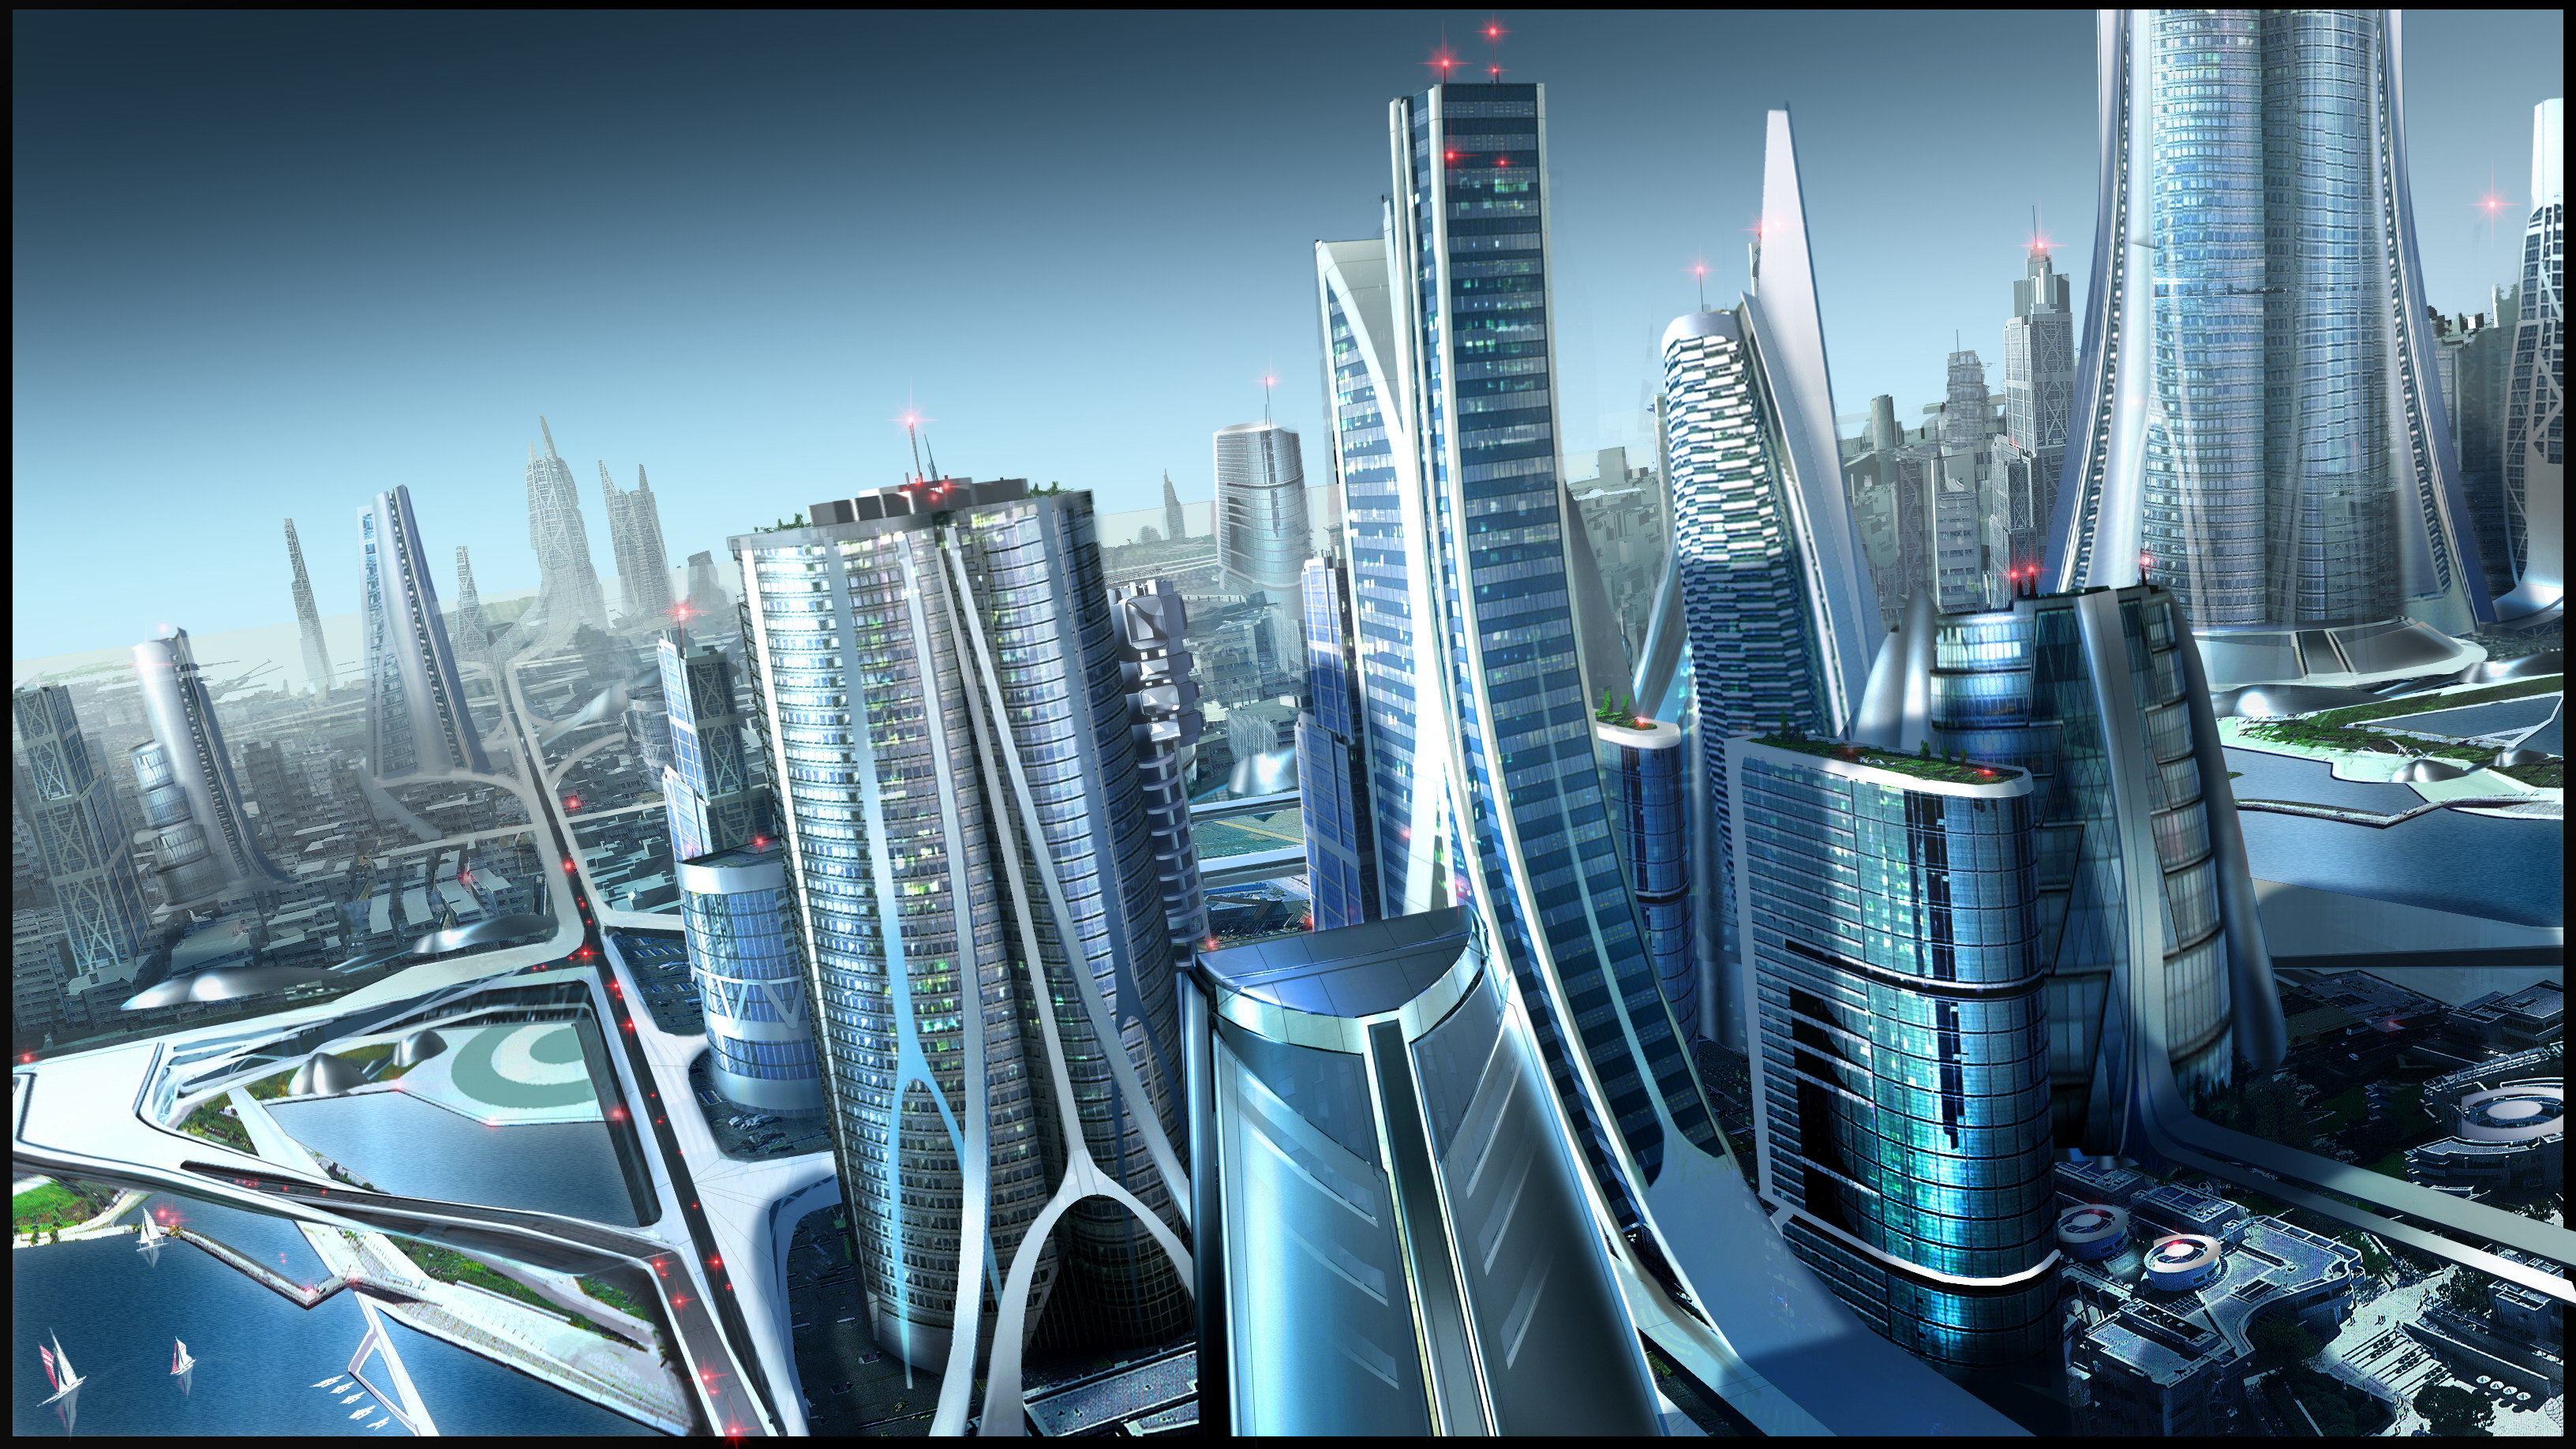 3264x1836 These Futuristic City Wallpapers Will Take Your Breath Away | Future city,  Deviant art and Futuristic city